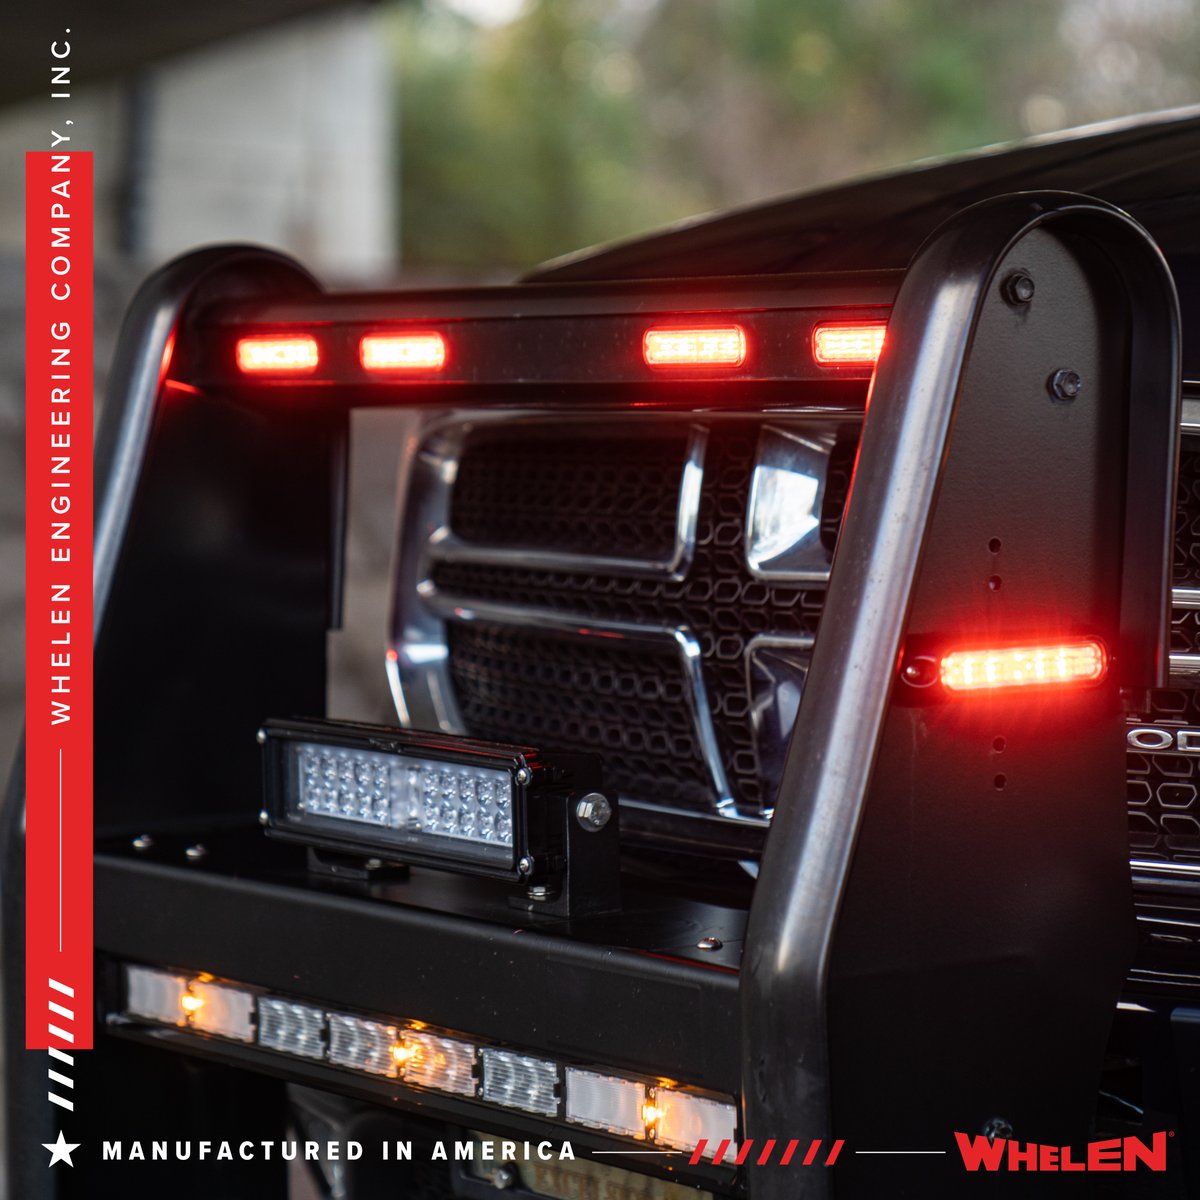 ION™ Series lightheads seamlessly integrate into vehicles’ push bars, taking your fleet’s lighting to the next level. 💡 

Learn more 👉 bit.ly/3OoYaqS

#Whelen #WhelenEngineering #ManufacturedinAmerica #FirstResponders